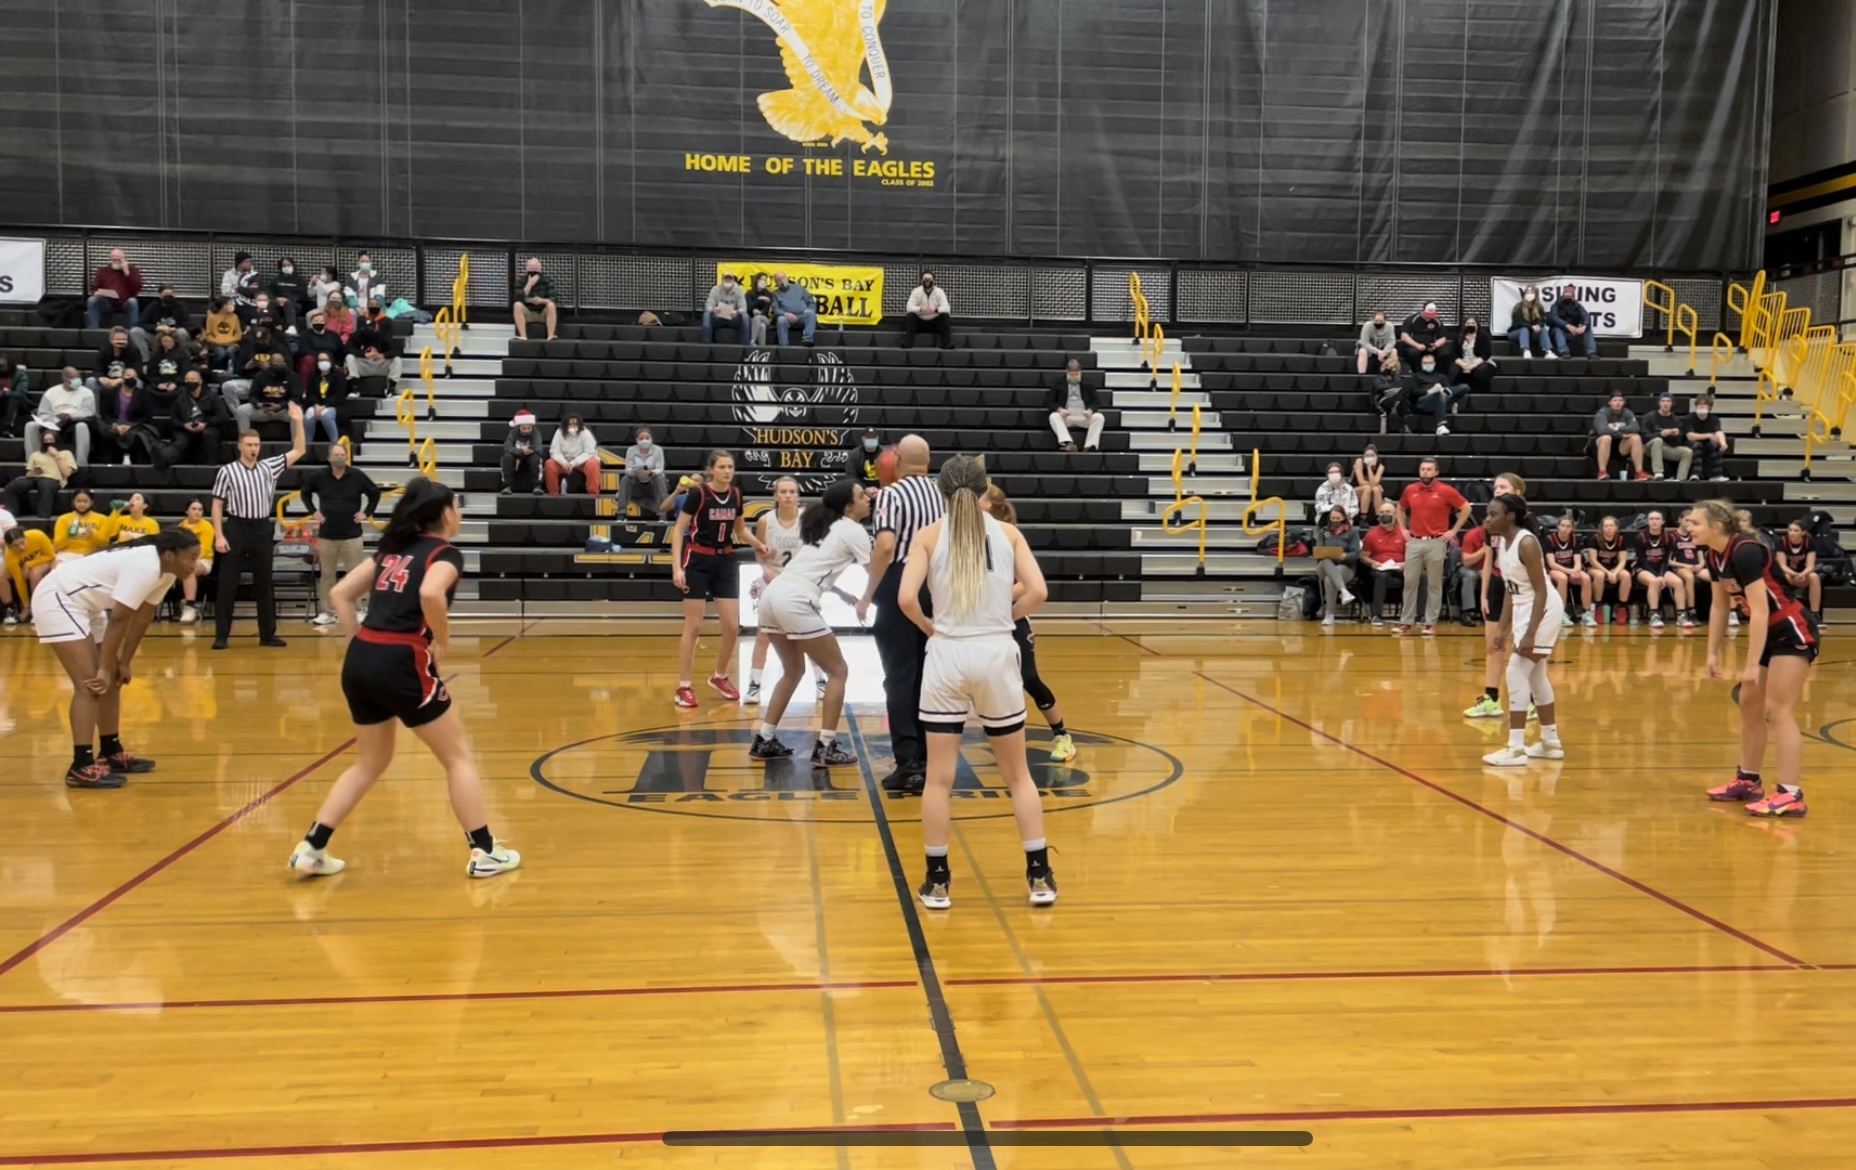 Hudson's Bay and Camas get ready for the opening tip of their non-league girls basketball tilt Tuesday in Vancouver.